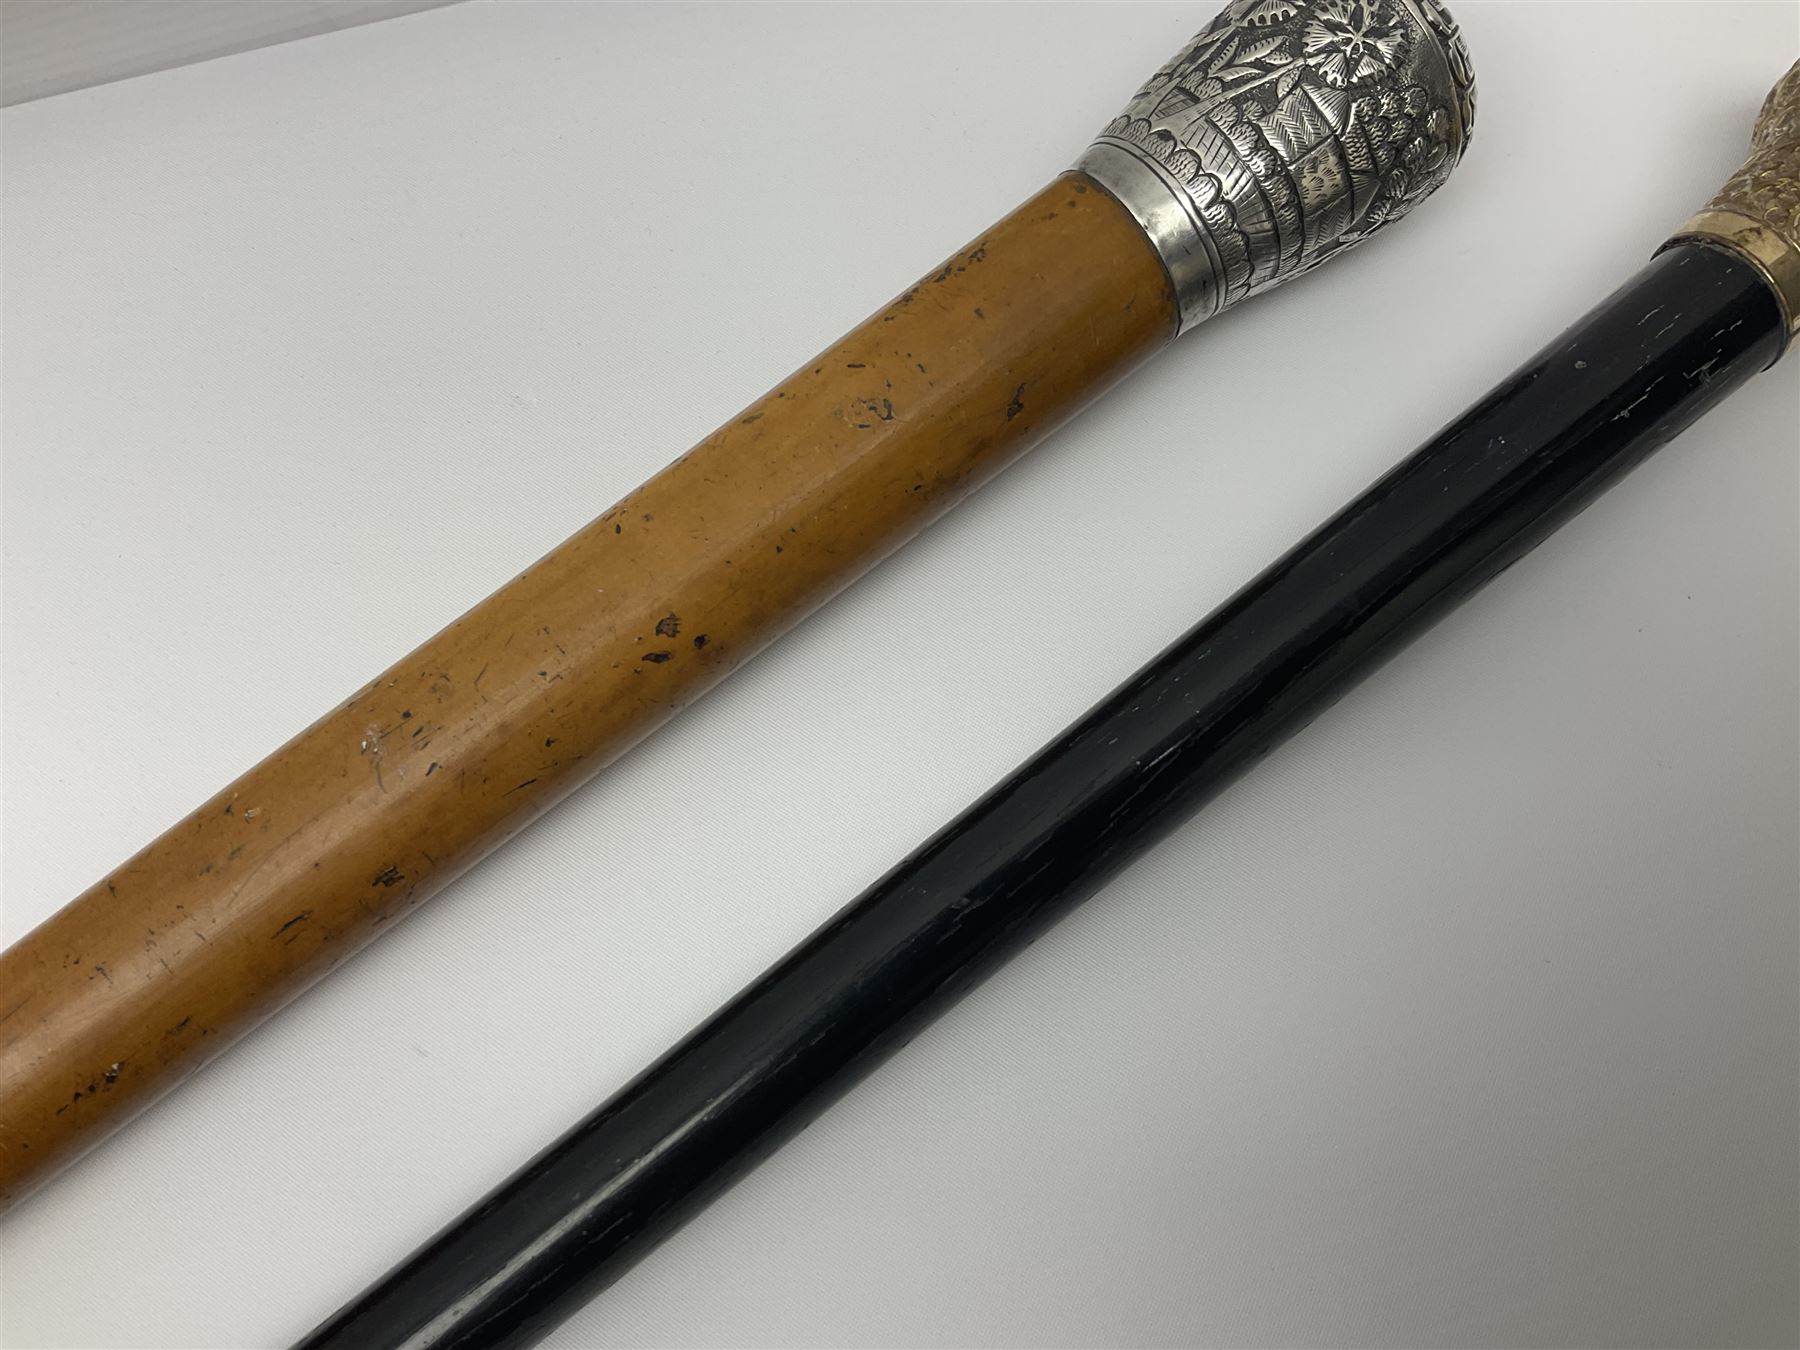 Malacca walking cane mounted with continental silver cap - Image 12 of 16